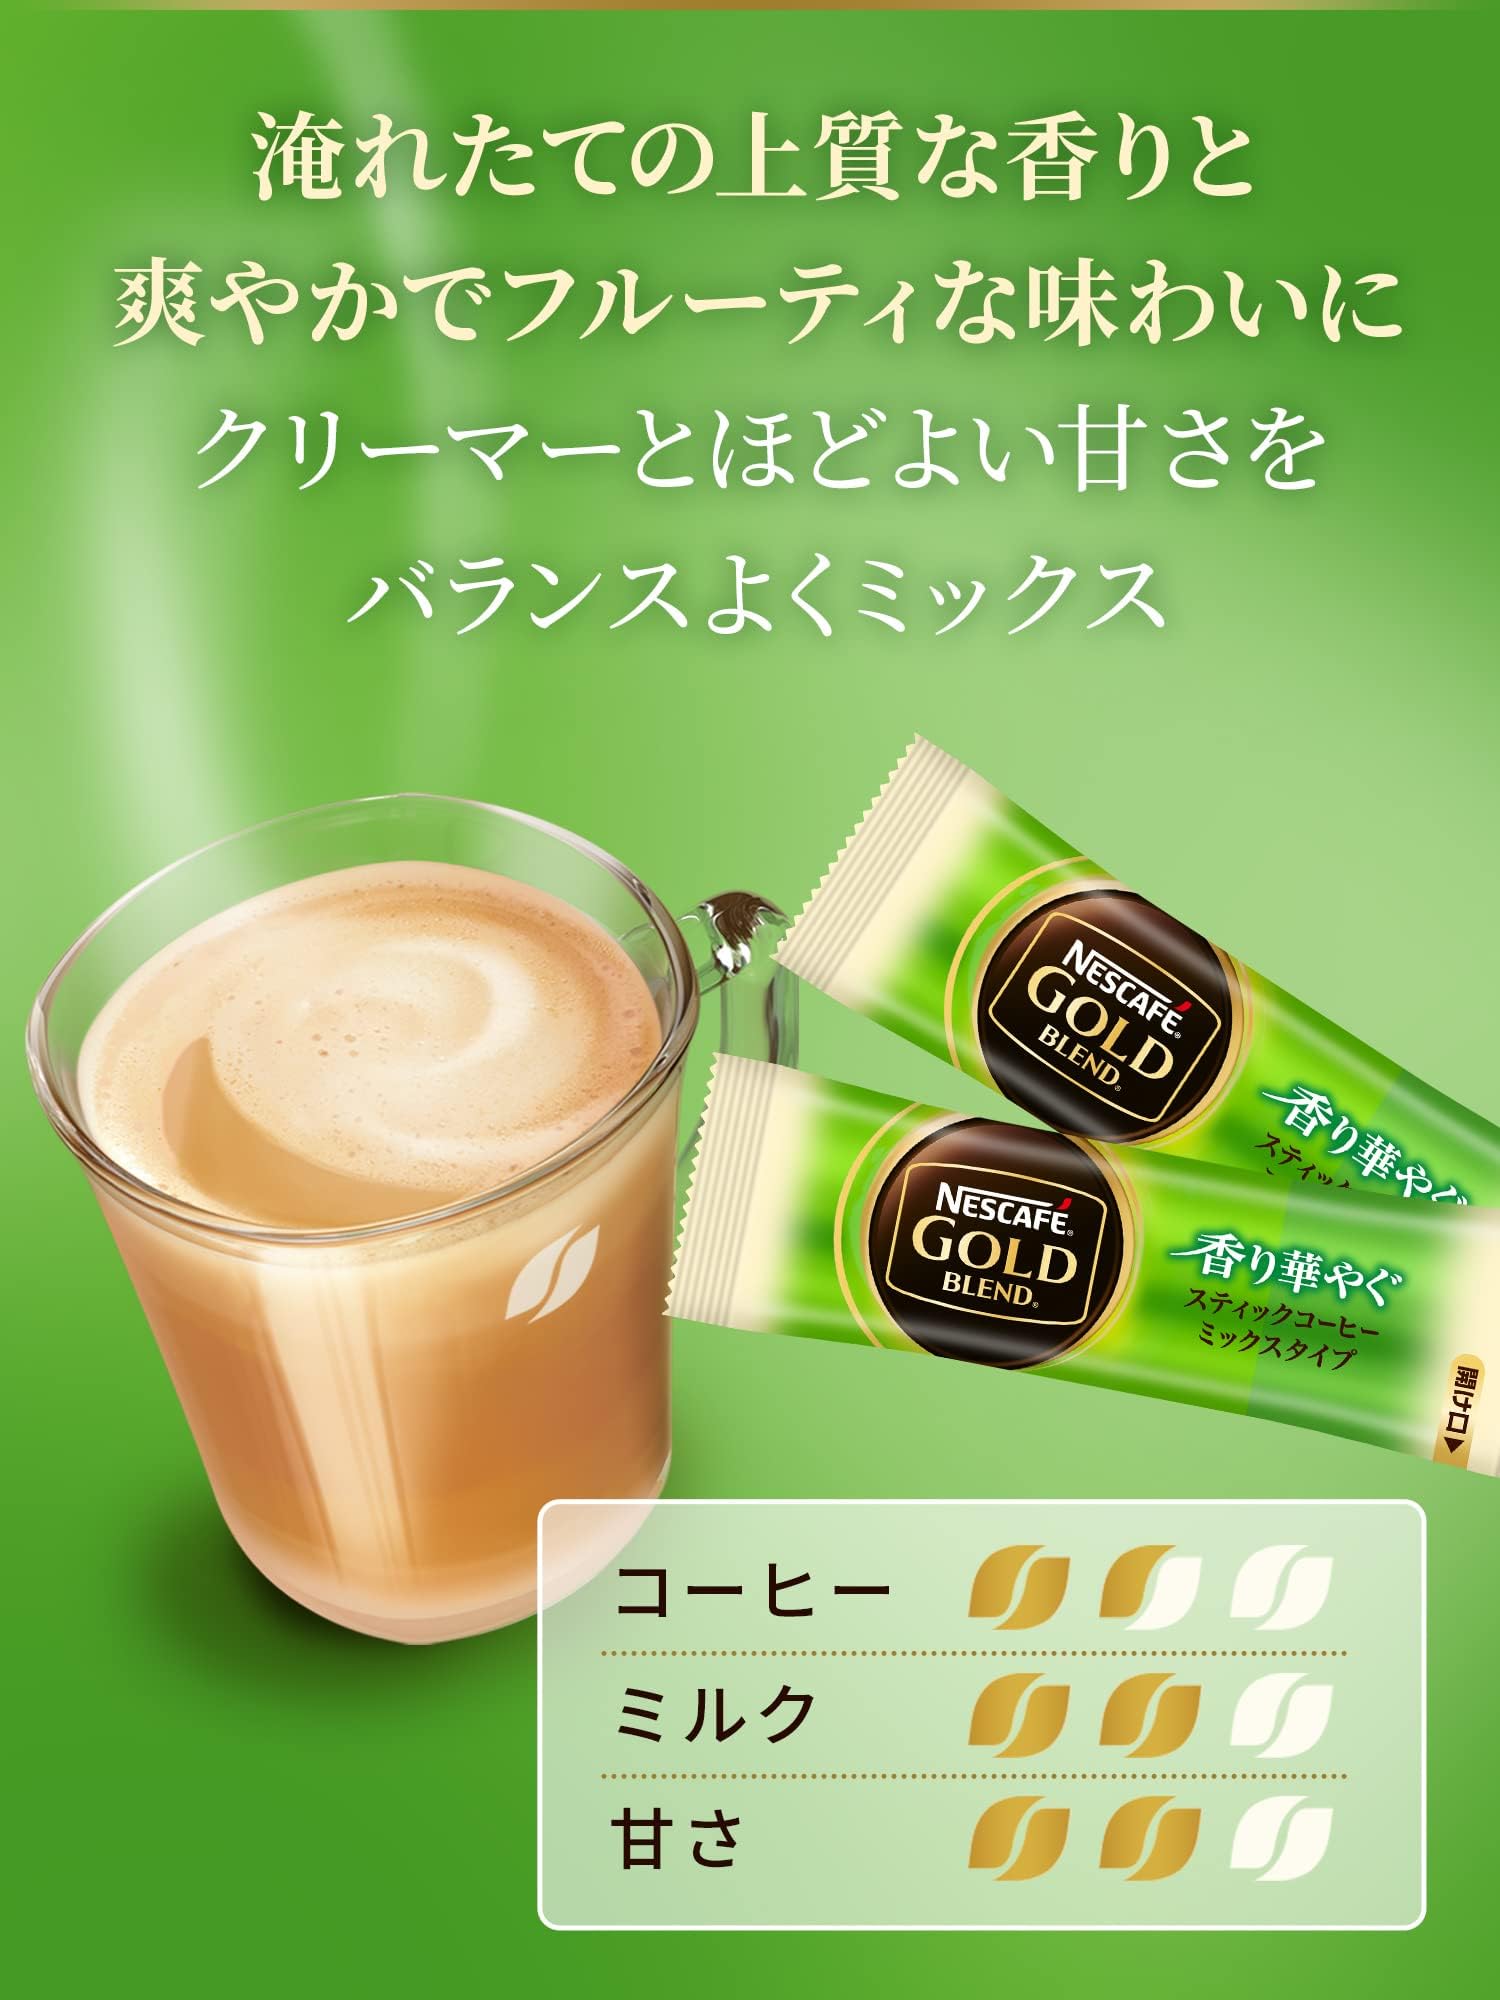 nes Cafe Gold Blend fragrance ... Cafe Latte stick coffee 22P ×2 box 44 cup minute 